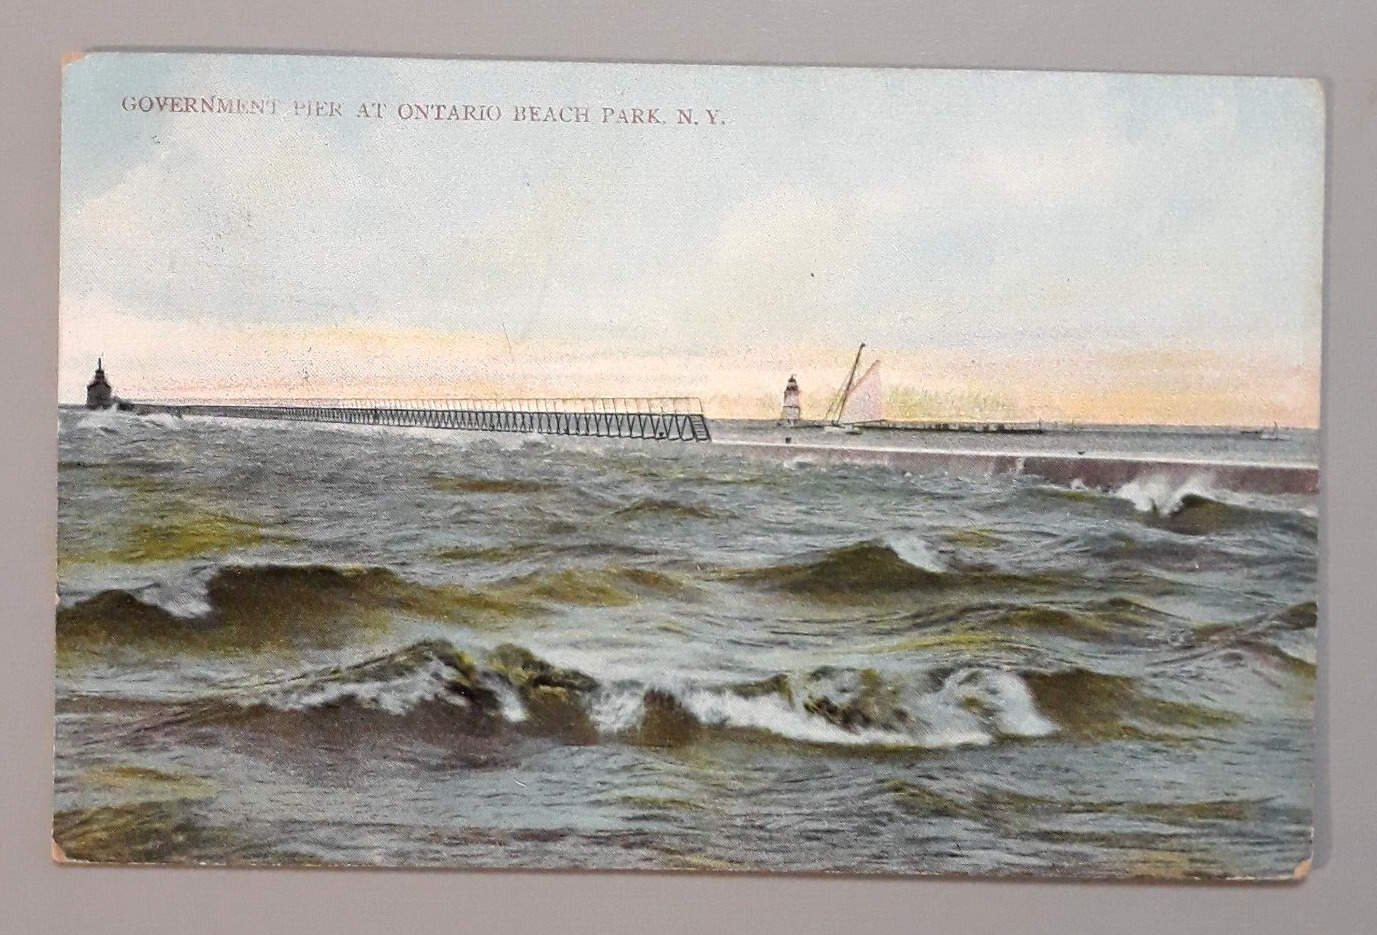 Vintage 1910 Postcard Rochester NY Government Pier at Ontario Beach